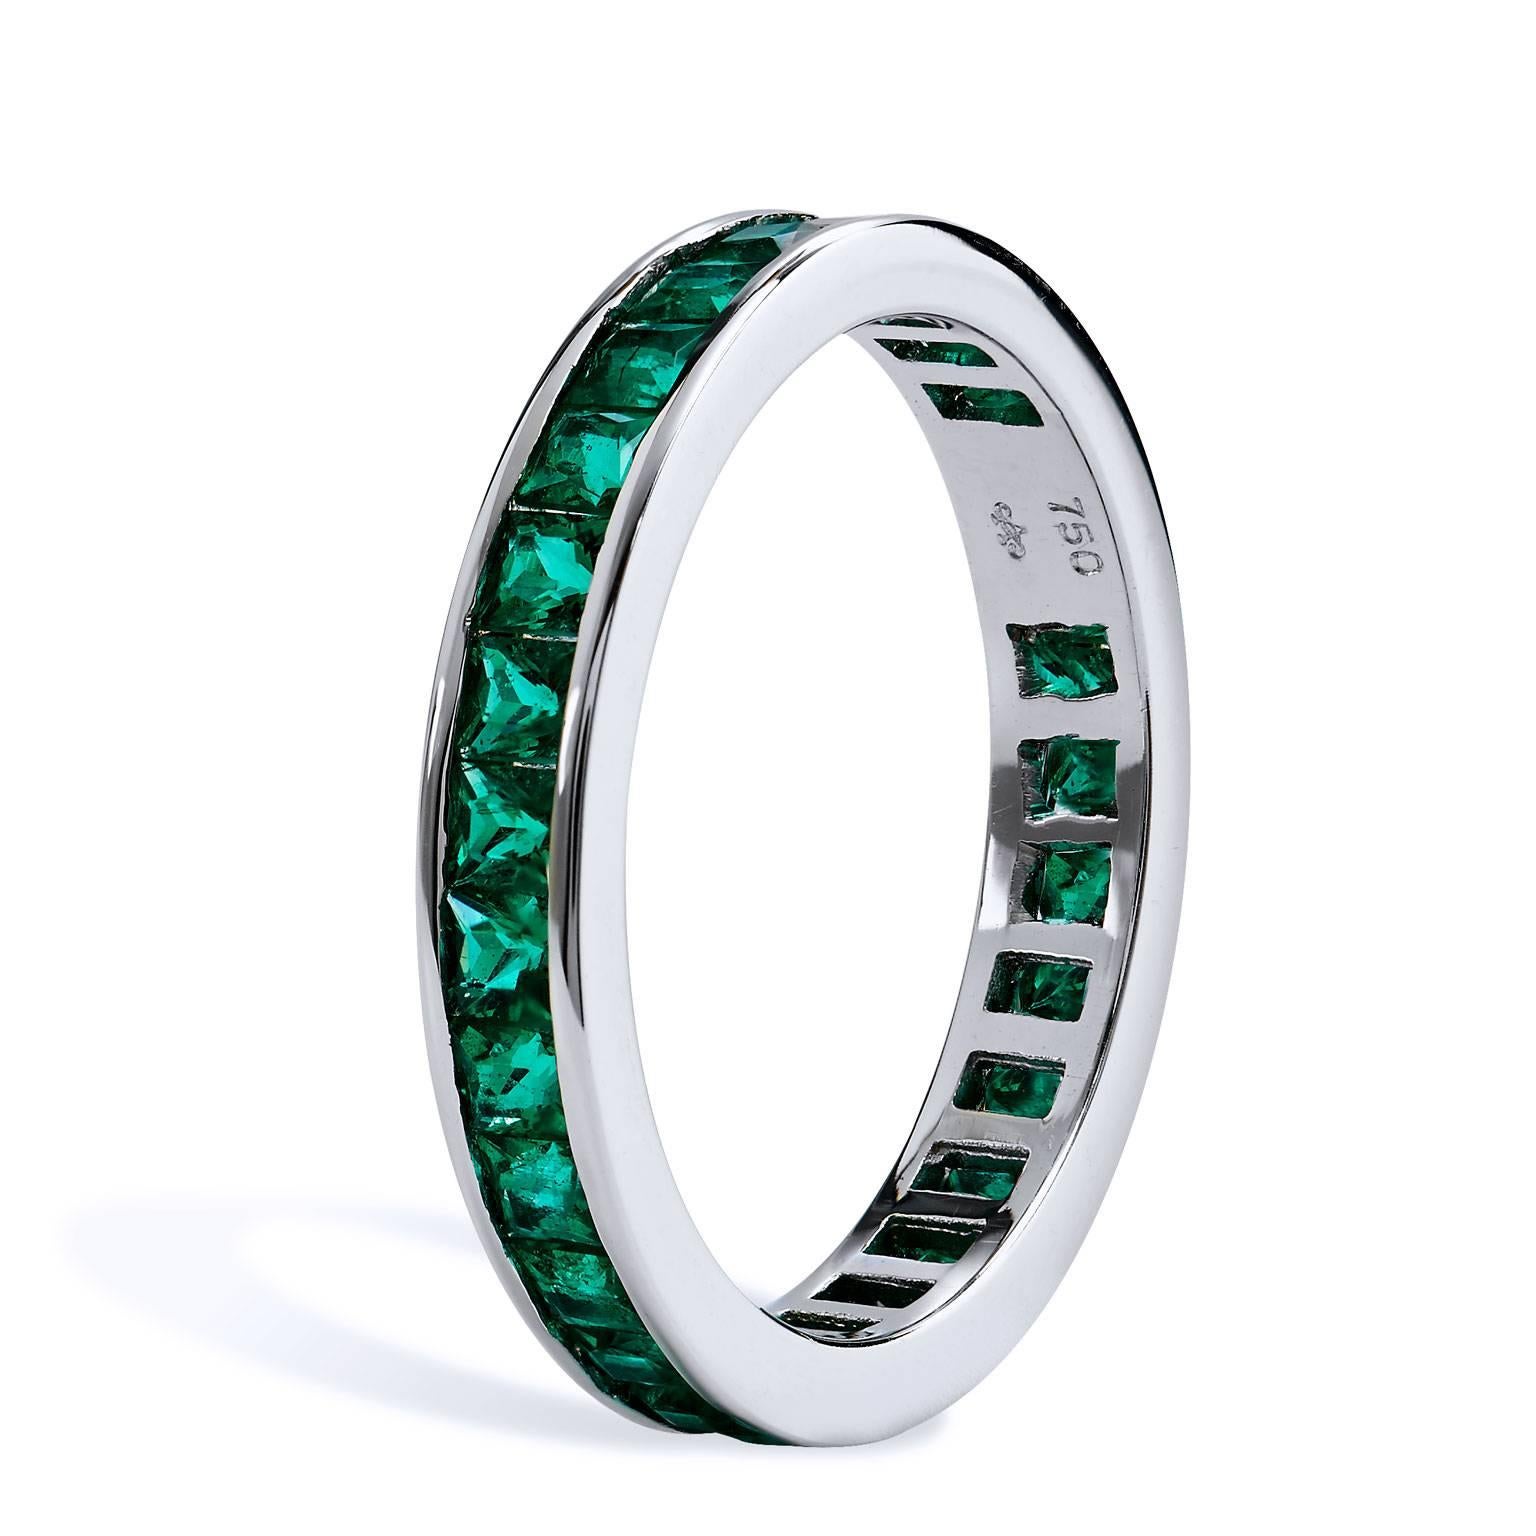 All around band contains twenty nine square emeralds. The band is crafted in eighteen karat white gold. A classic channel setting maximizes the bright emerald color of the 1.14 carats of emeralds 
The ring is a size 6
